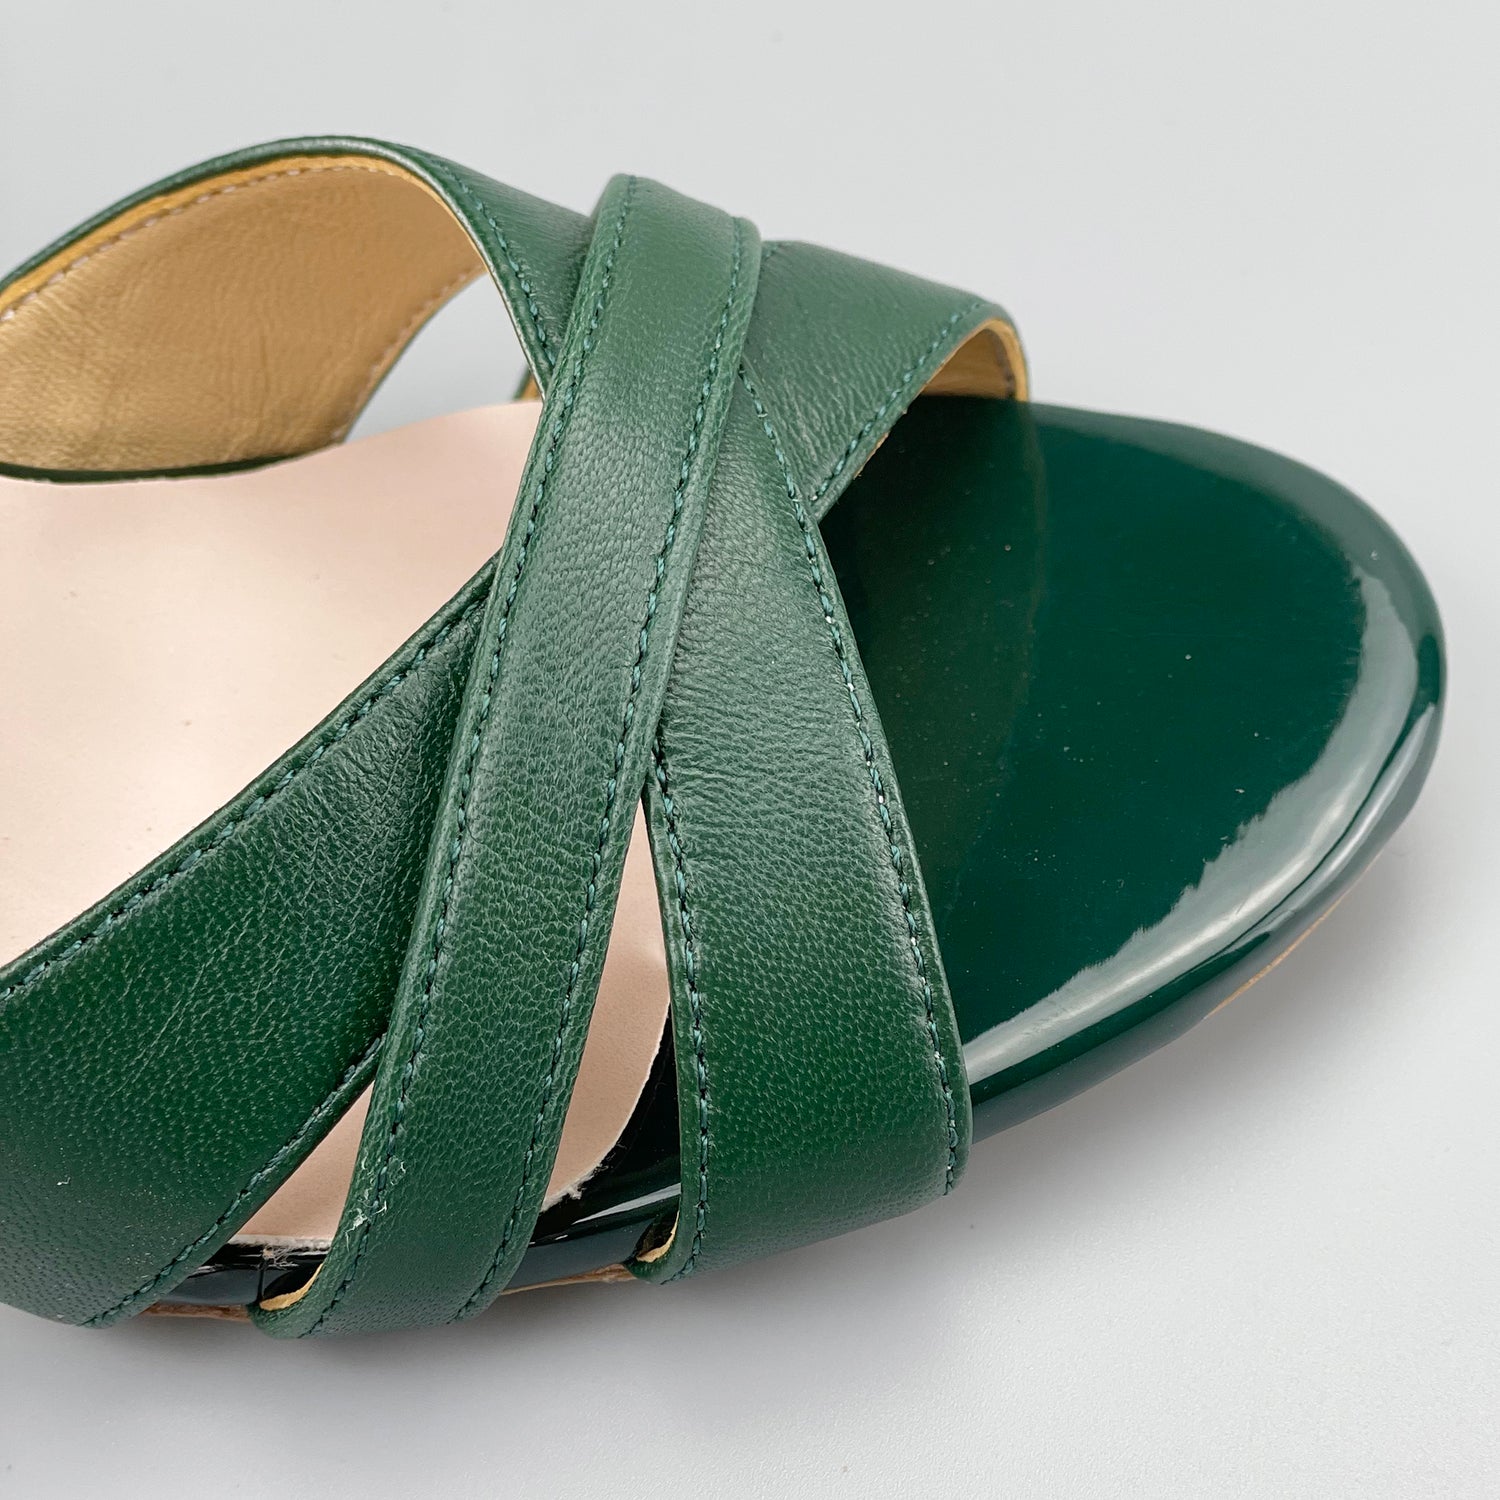 Pro Dancer Peep-toe Argentine Tango Shoes with Closed-back High Heels and Hard Leather Sole in Green5